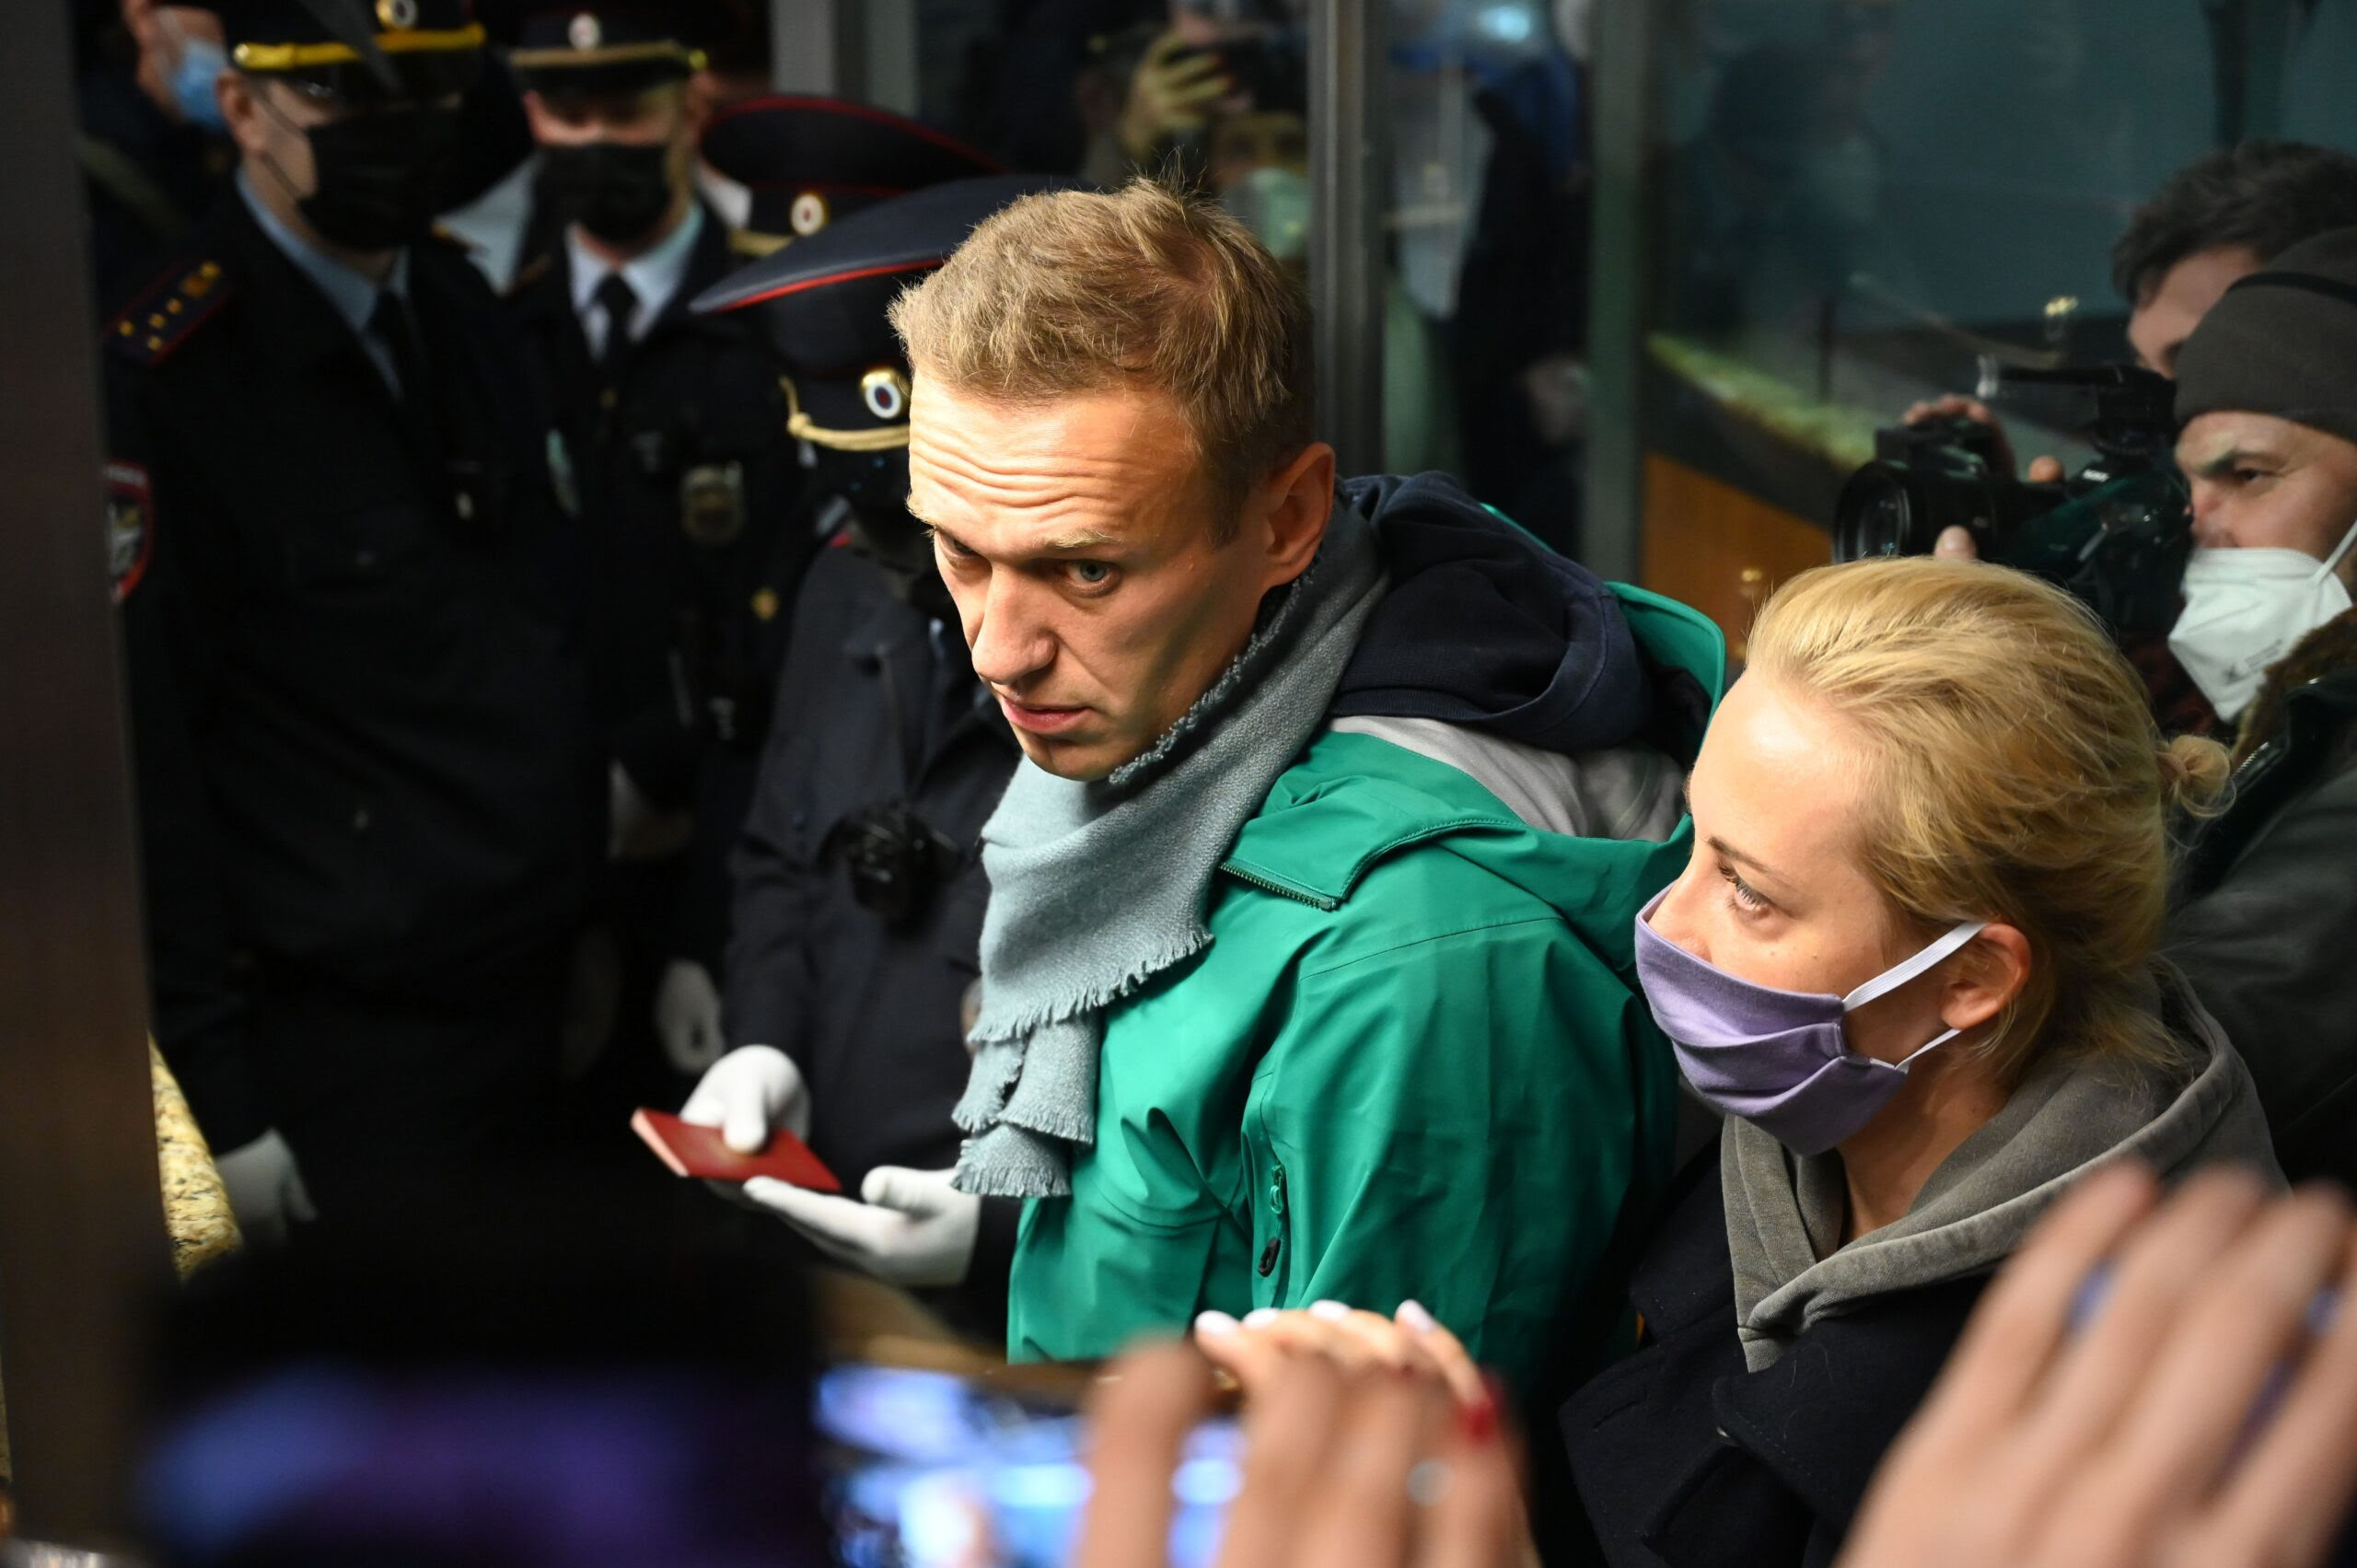 The Life of Jailed Russian Dissident Alexei Navalny Is in Peril. US Must Act to Save Him.